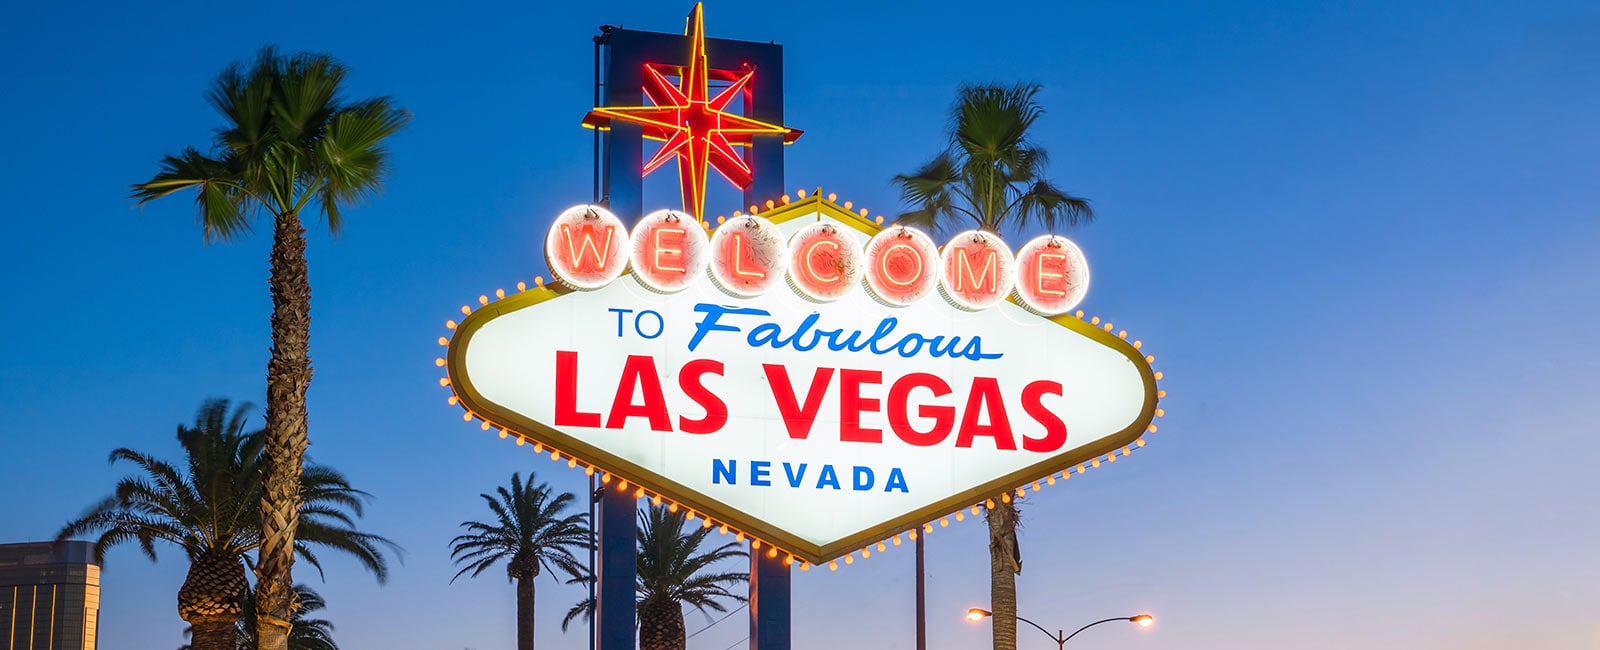 Enjoy a vacation in Las Vegas, Nevada with Hilton Grand Vacations